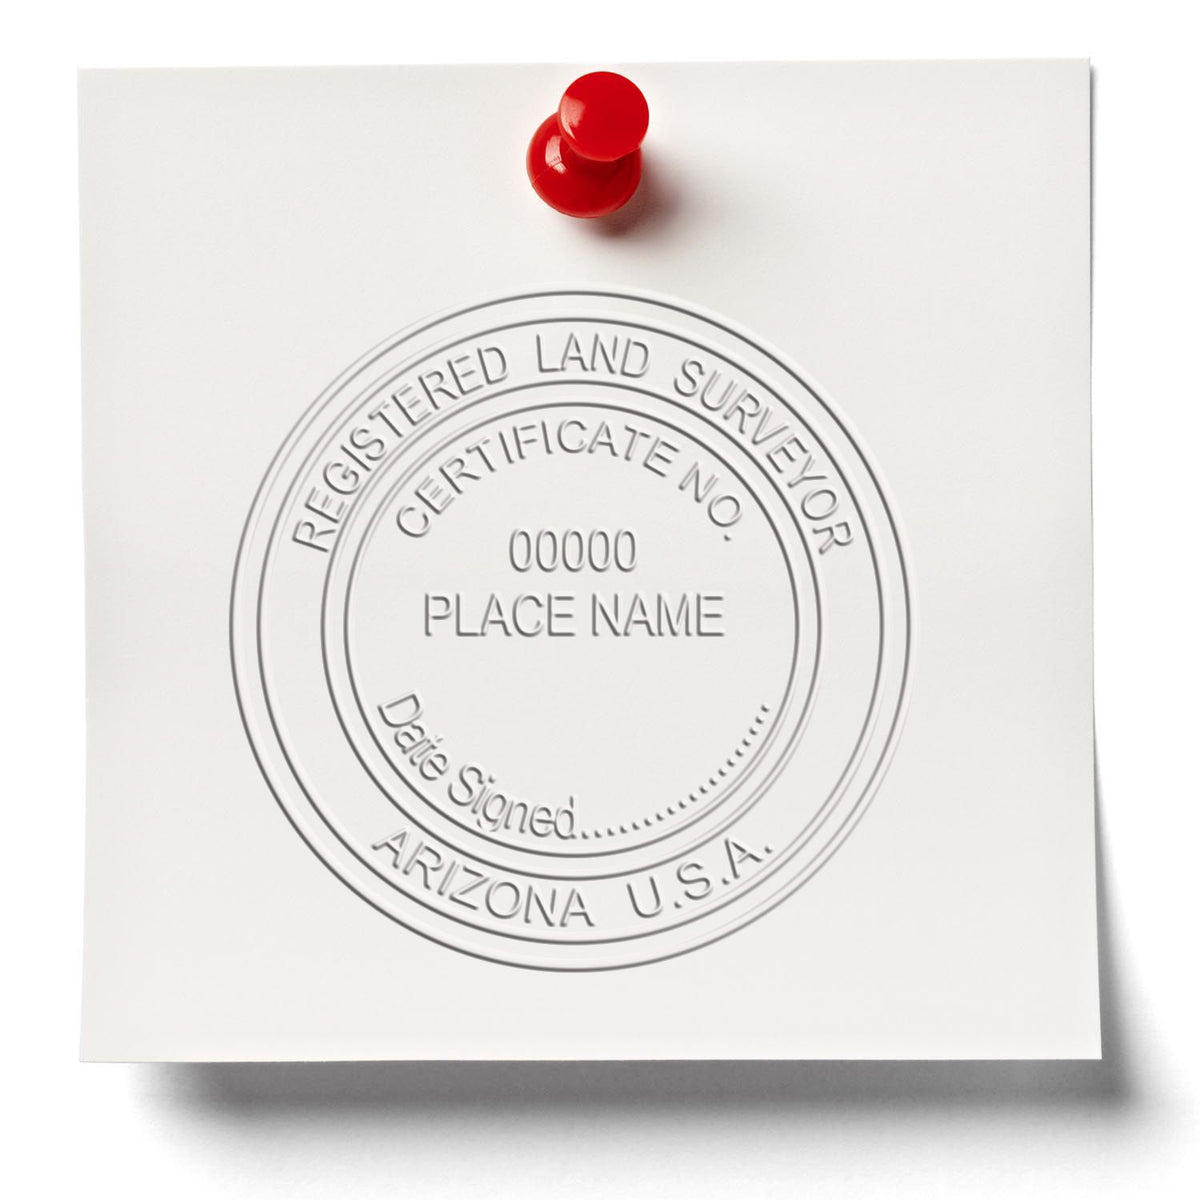 A photograph of the State of Arizona Soft Land Surveyor Embossing Seal stamp impression reveals a vivid, professional image of the on paper.